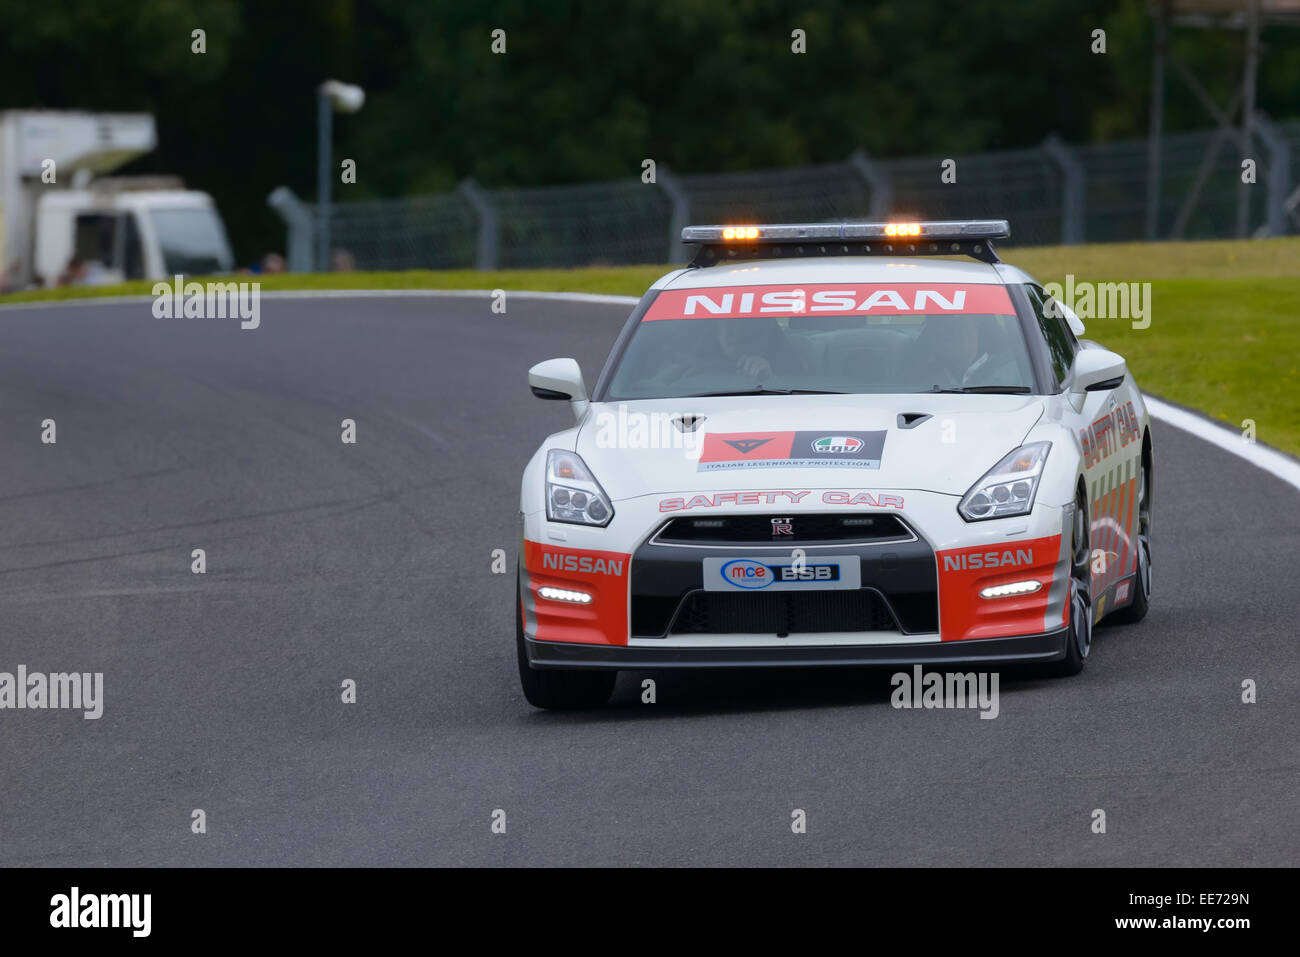 A Safety Car doing a hospitality lap at Cadwell Park circuit, Lincolnshire, UK. Stock Photo